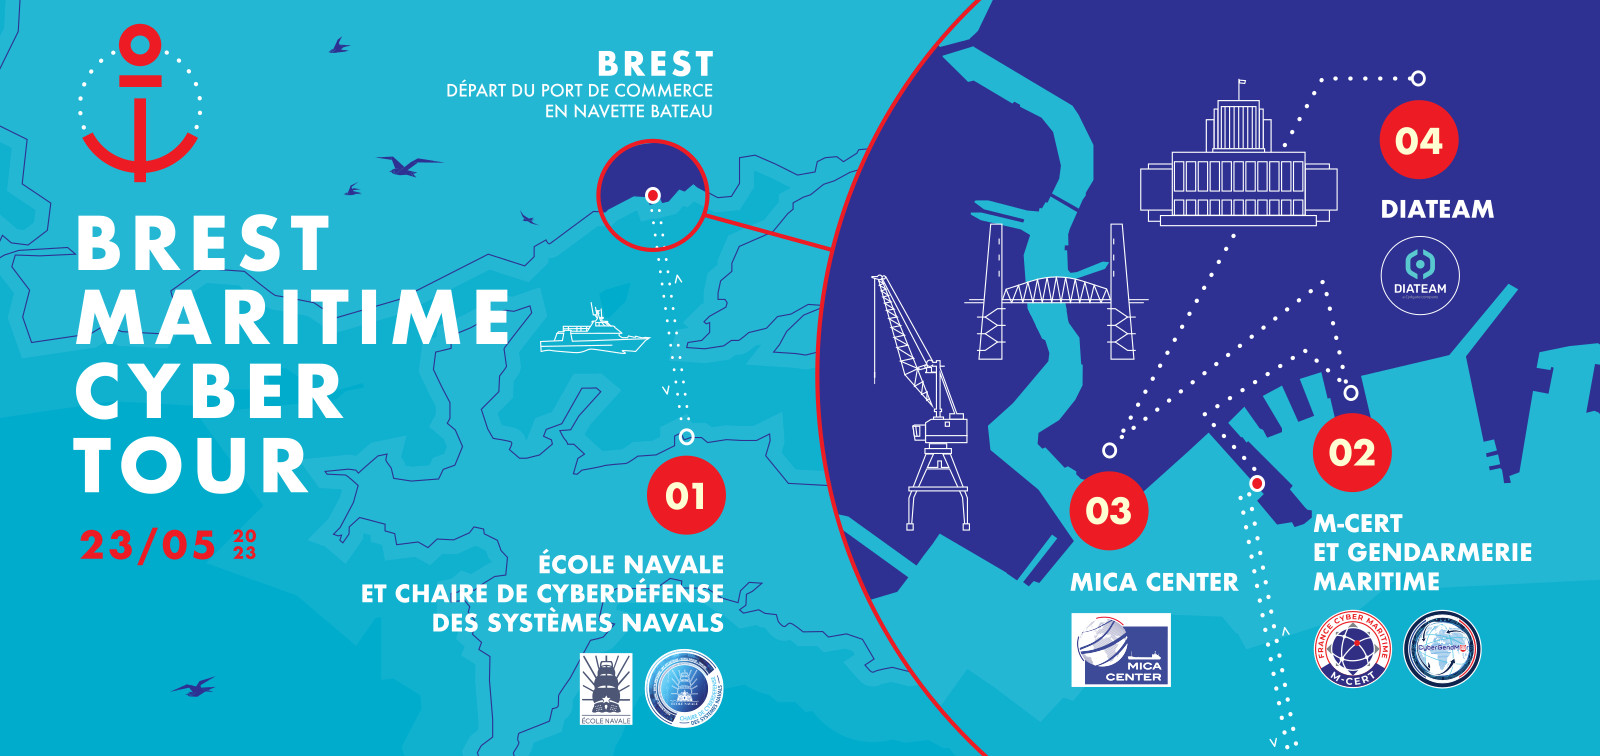 DIATEAM to be one stop in Brest Maritime Cyber Tour on May 23rd